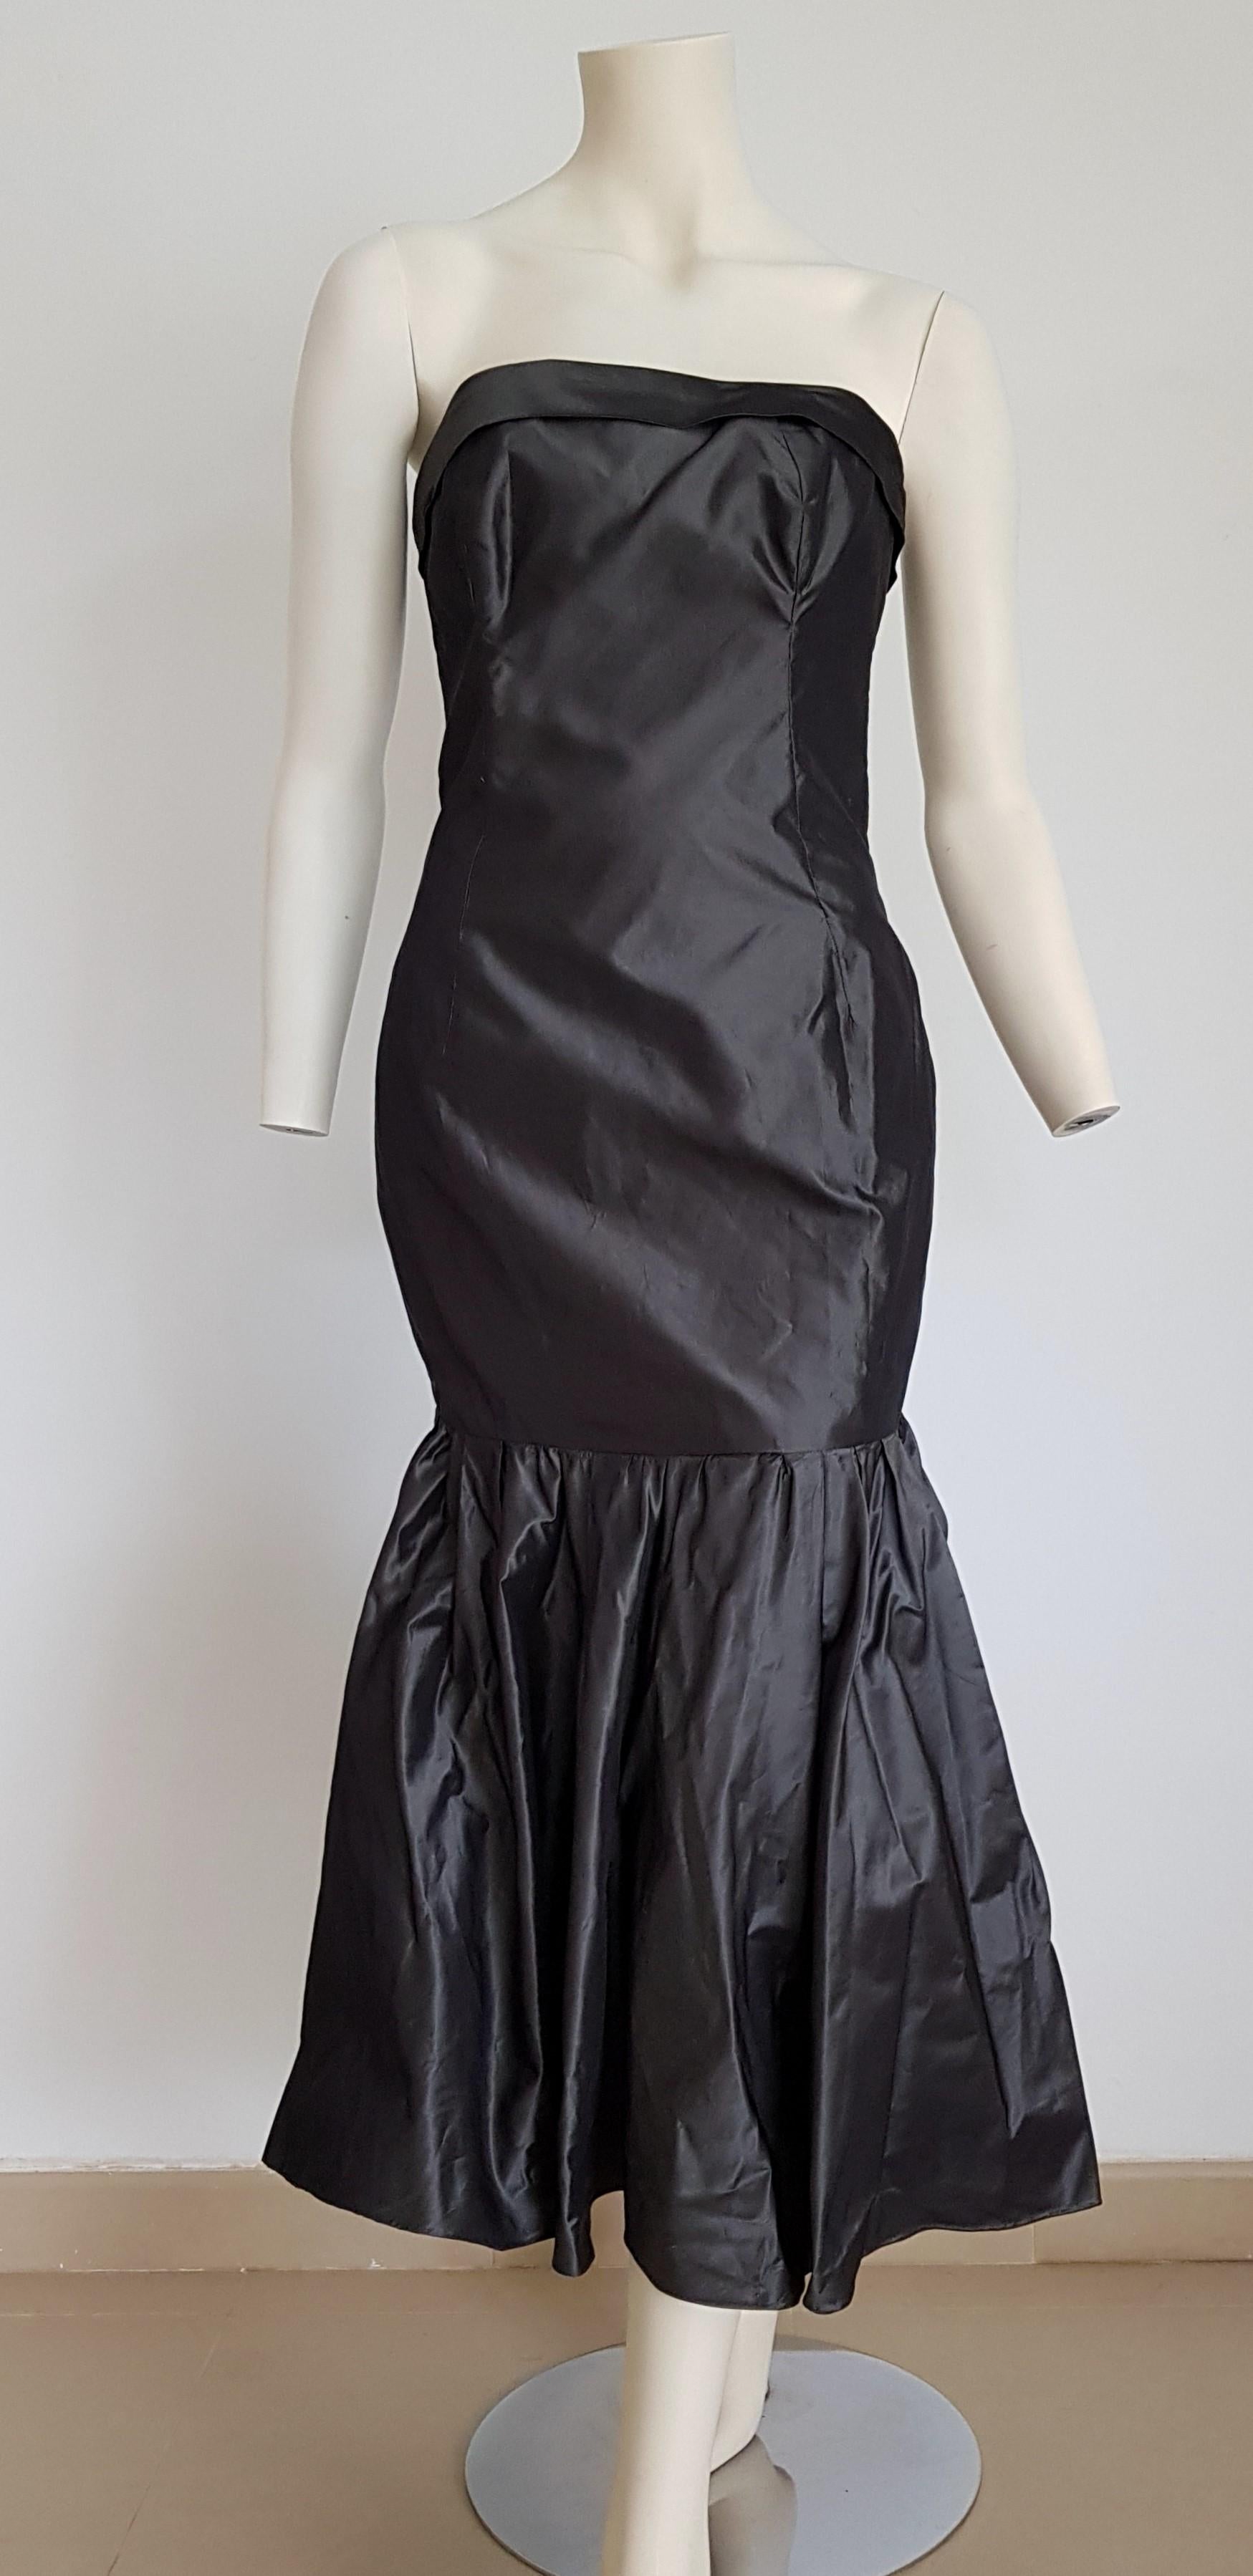 CHANEL Haute Couture strapless dark grey anthracite Silk gown - Unworn.

SIZE: equivalent to about Small / Medium, please review approx measurements as follows in cm: lenght 105, chest underarm to underarm 49 , bust circumference 88, waist